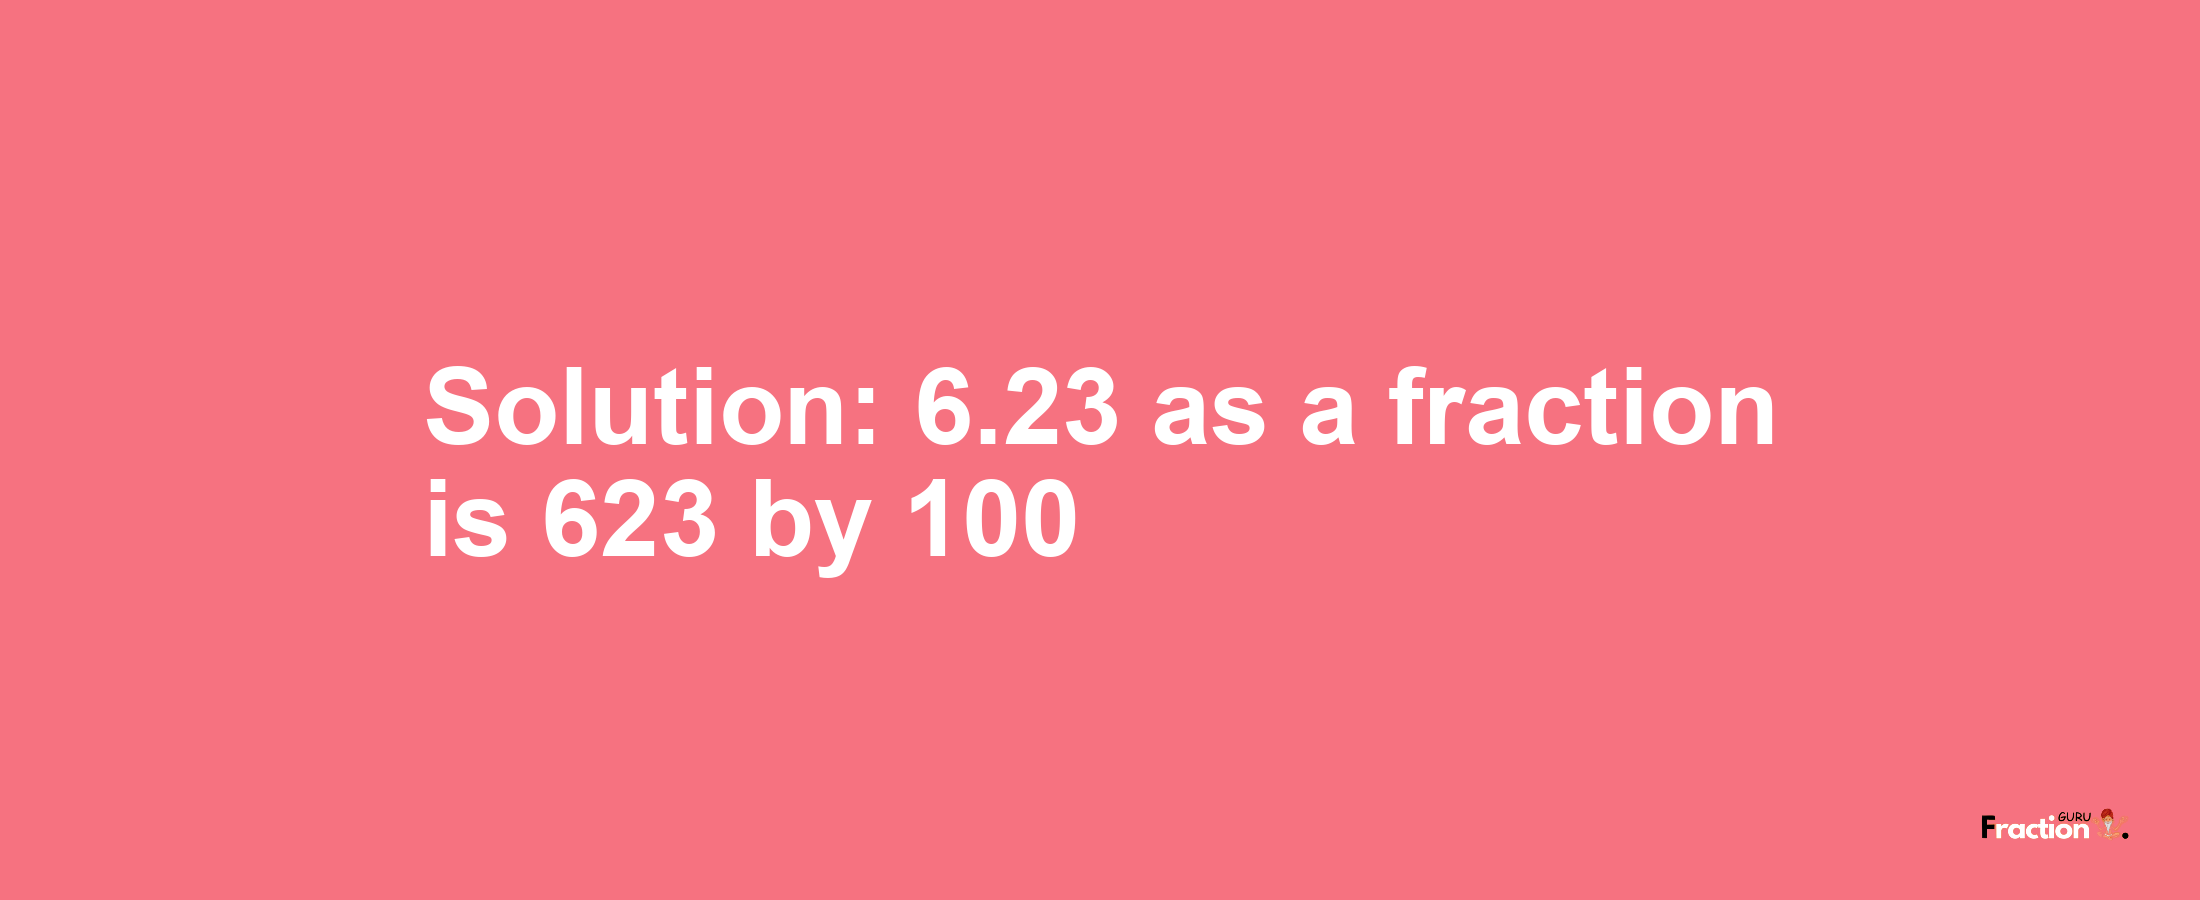 Solution:6.23 as a fraction is 623/100